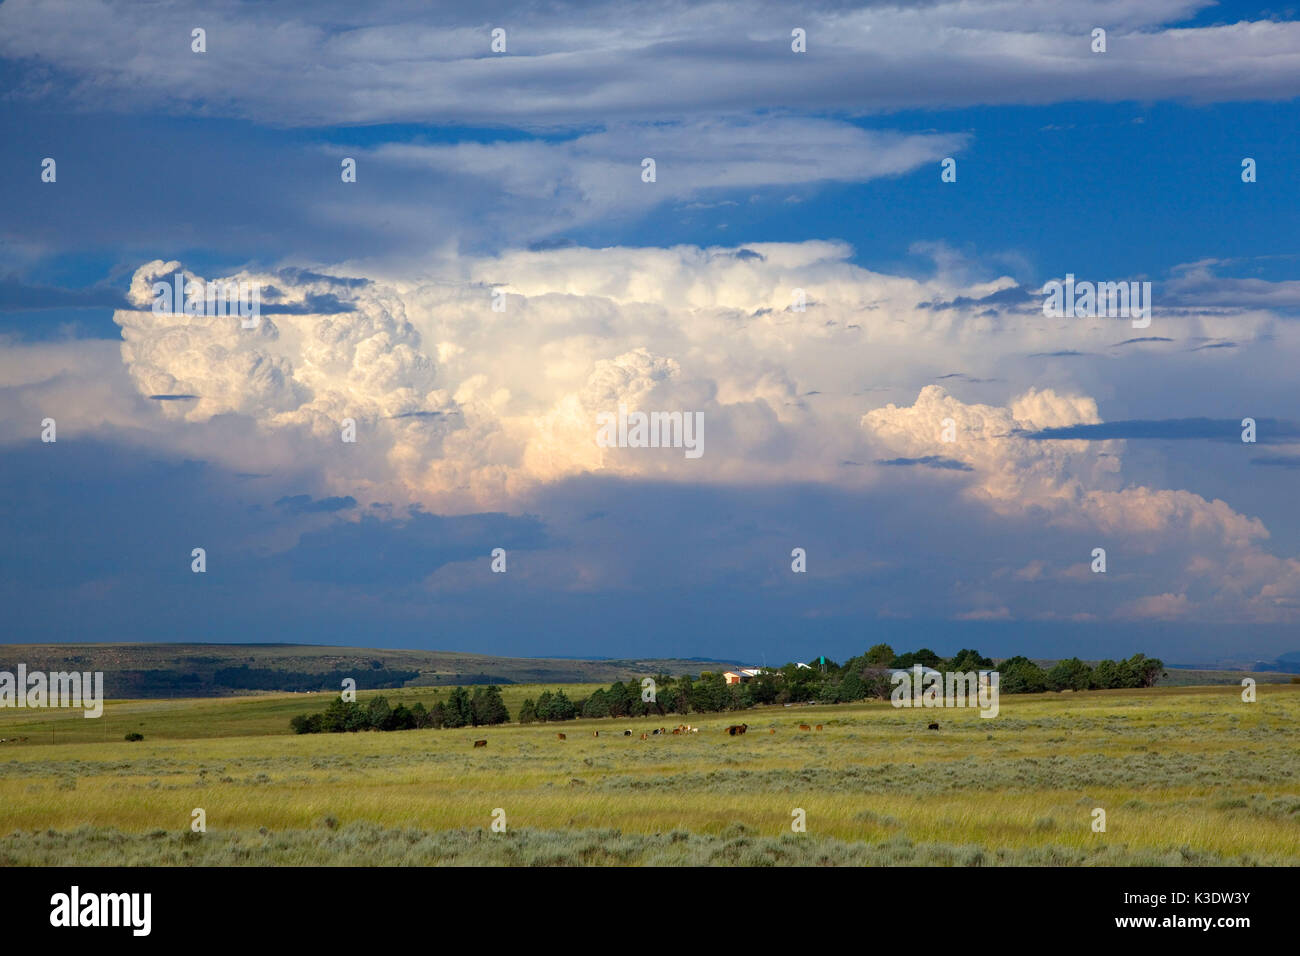 Africa, South Africa, east cape, eastern cape, farm country, Stock Photo